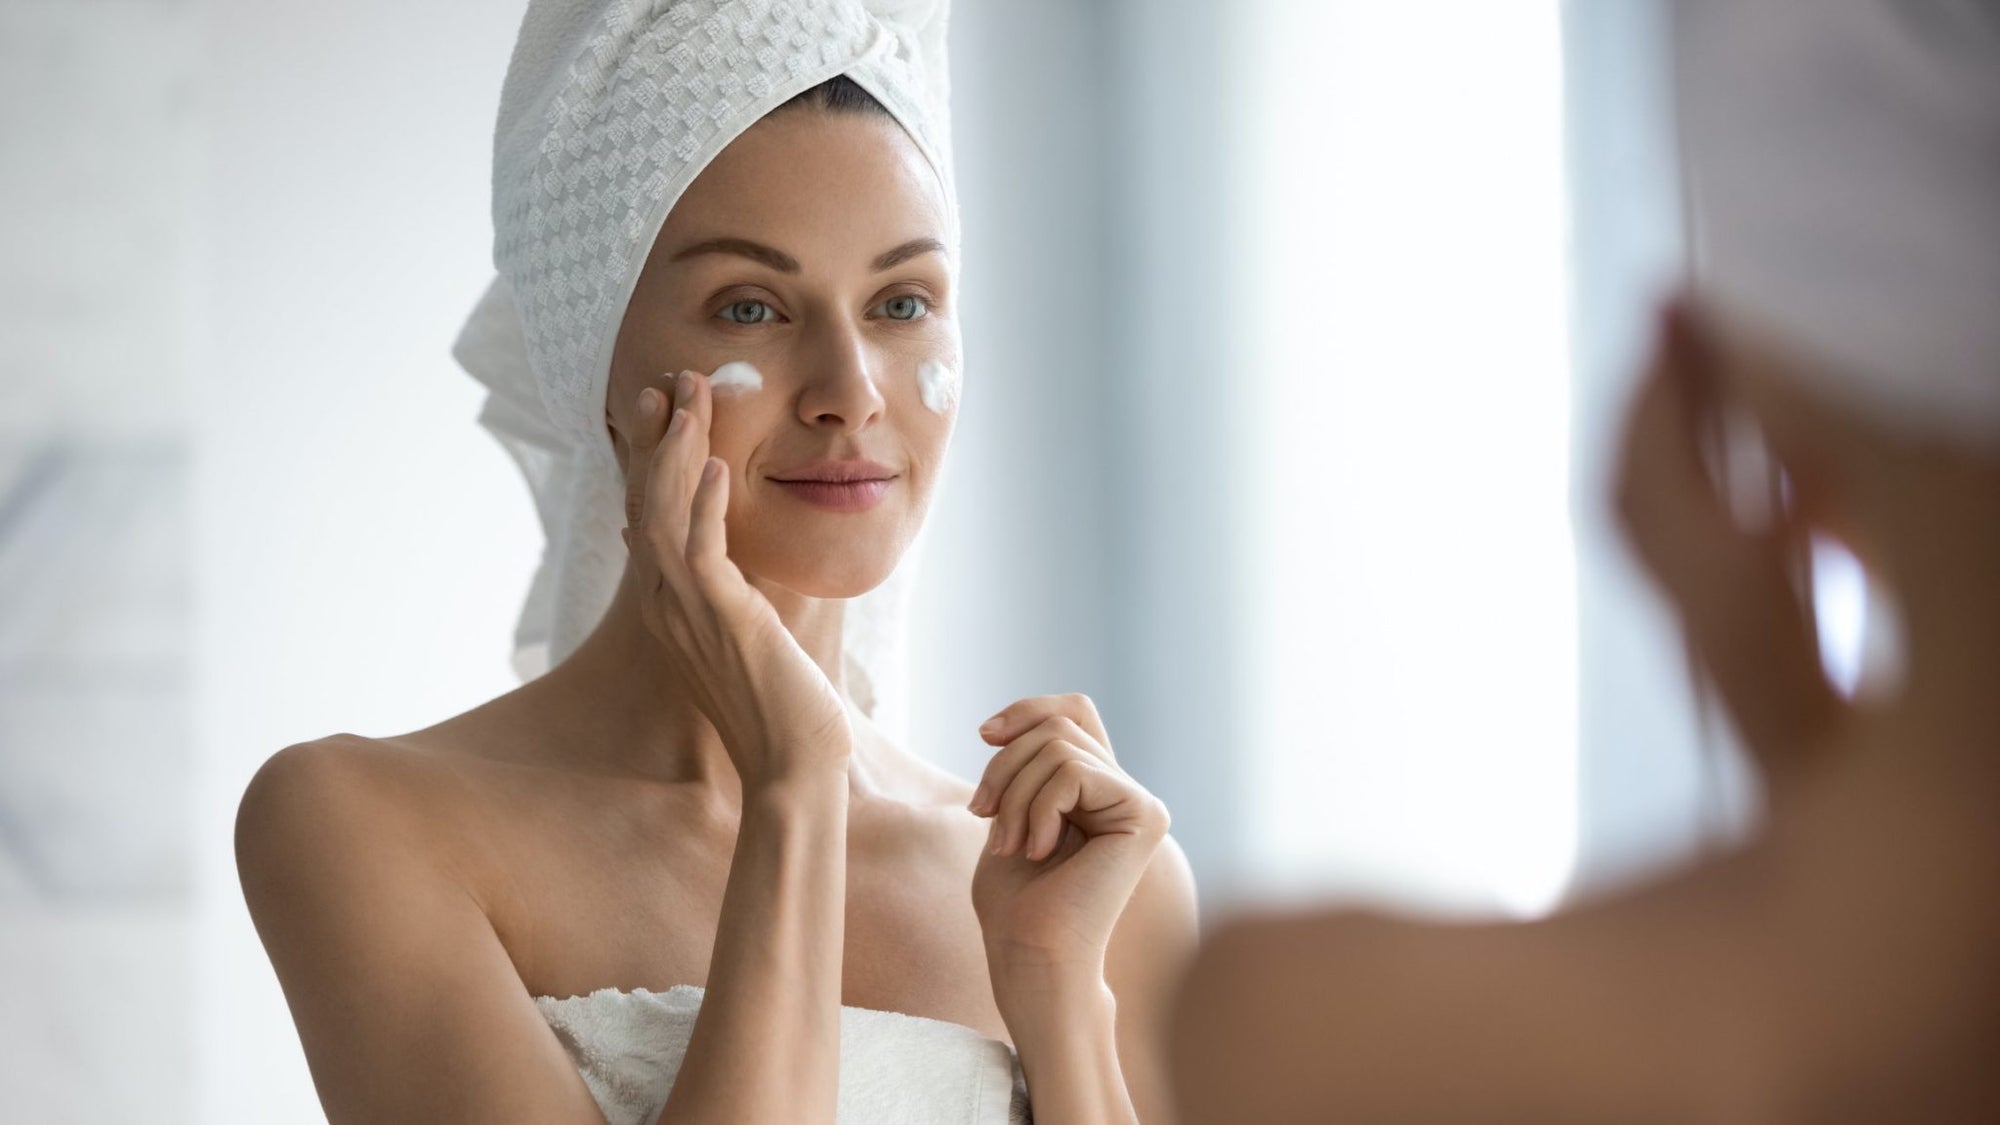 4 Tips to Help You Build Your Skincare Routine